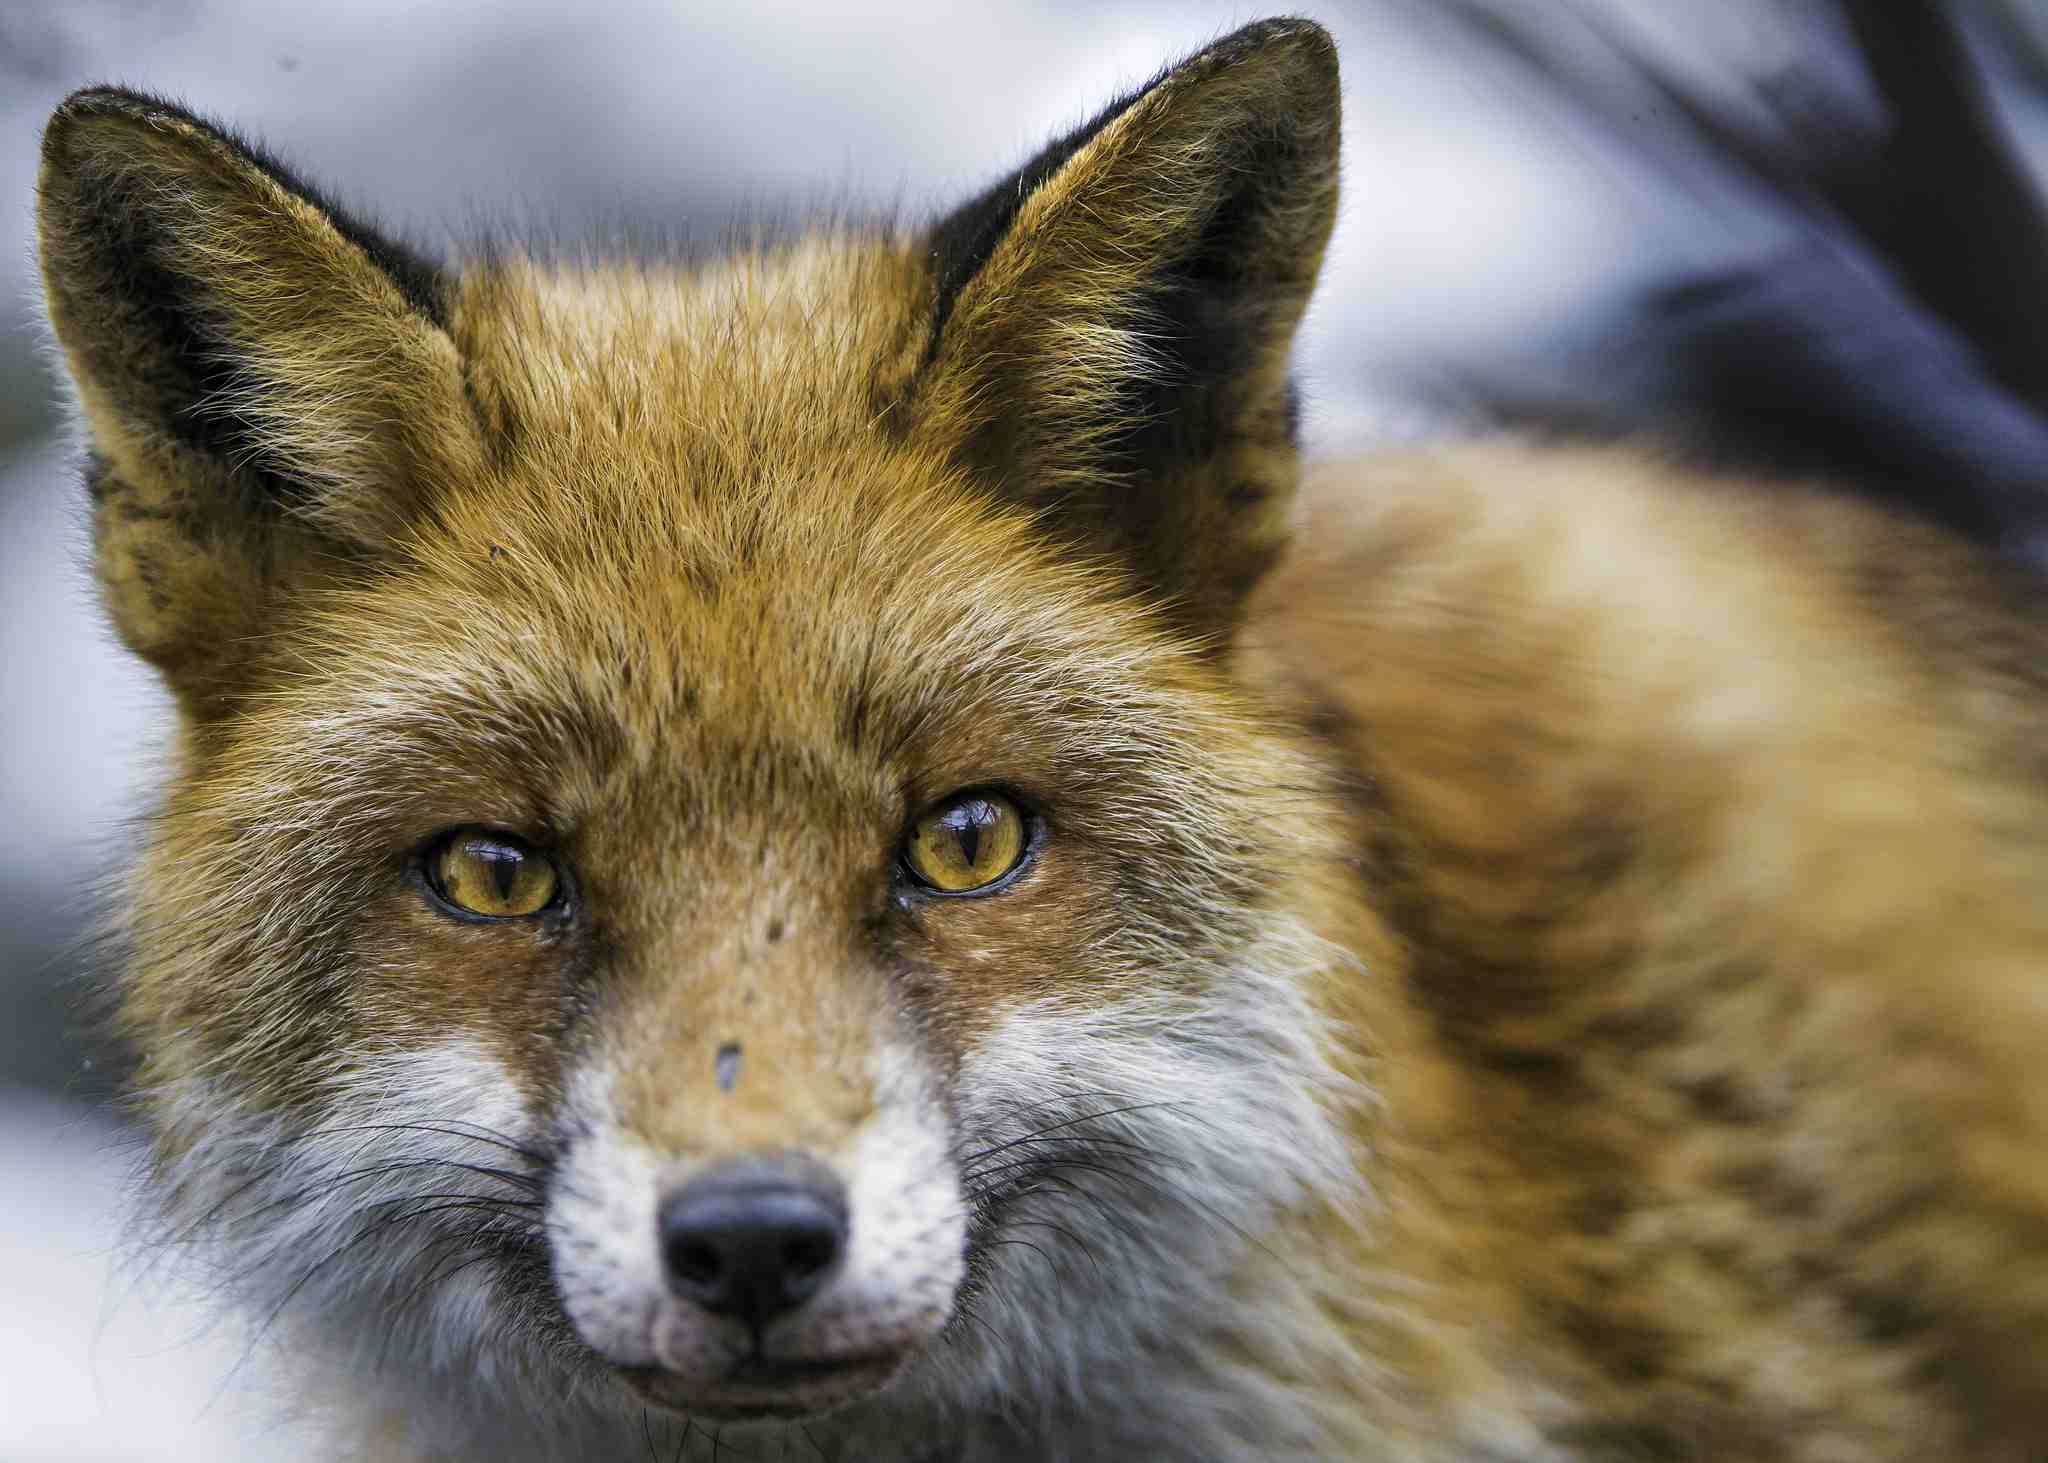 A close-up of a red fox looking into the camera.